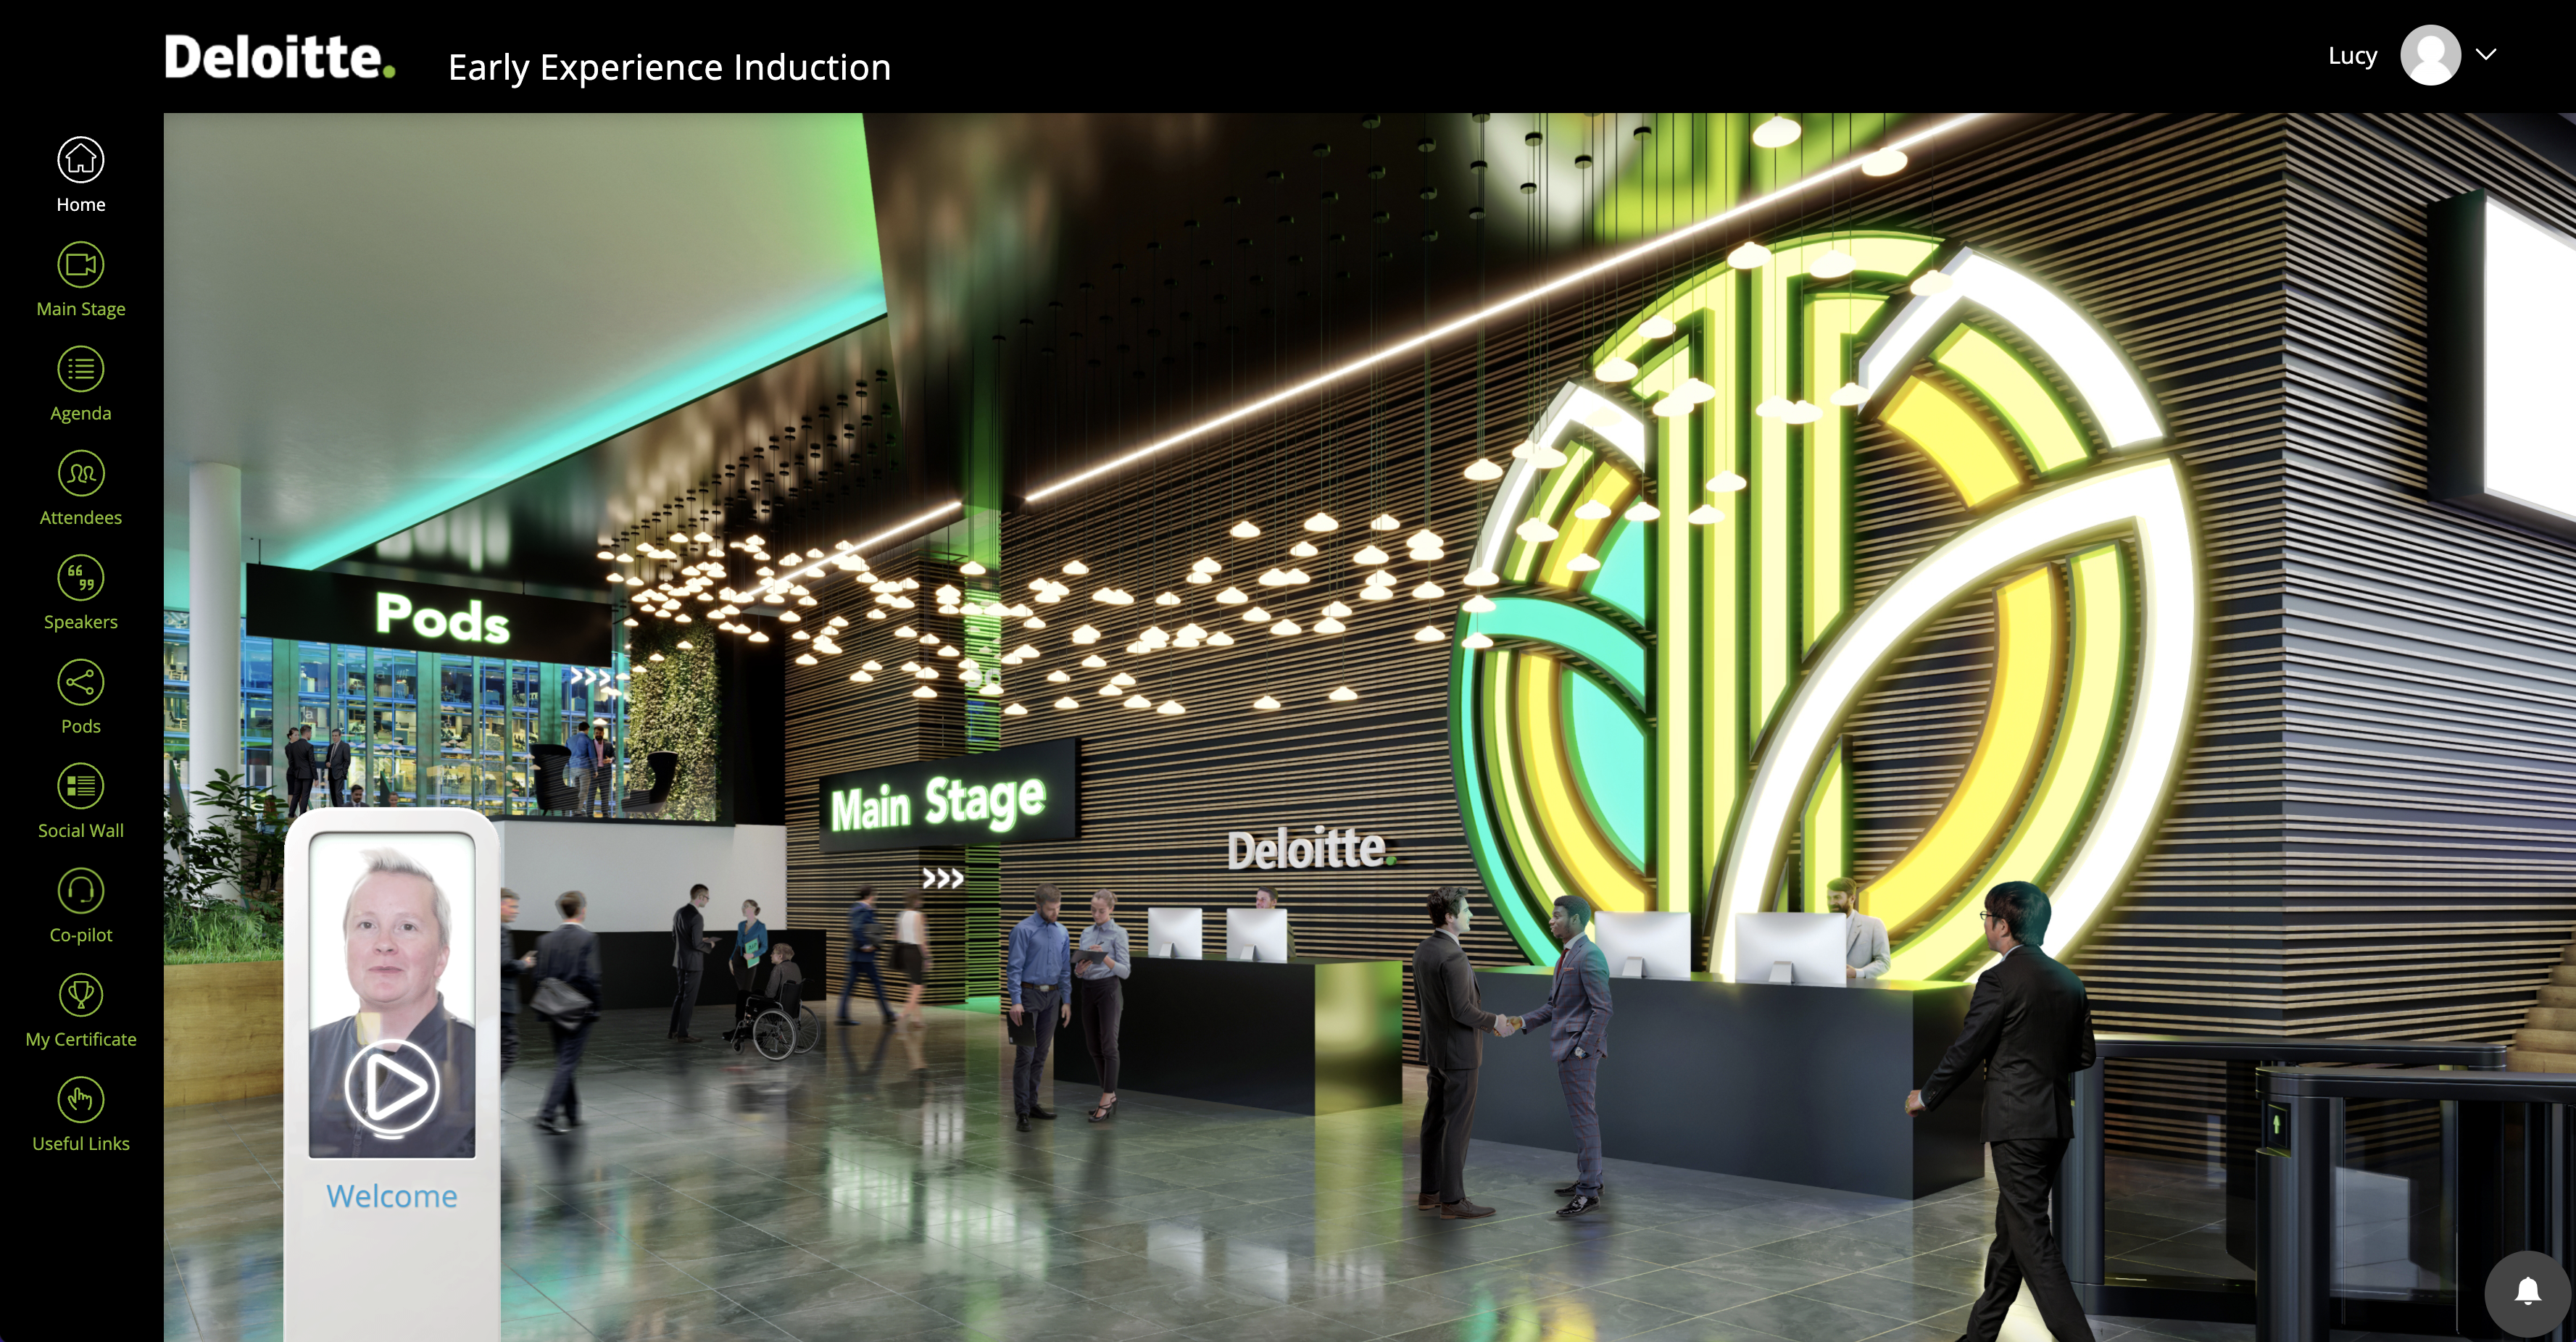 Deloitte Early Experience Induction - Lobby